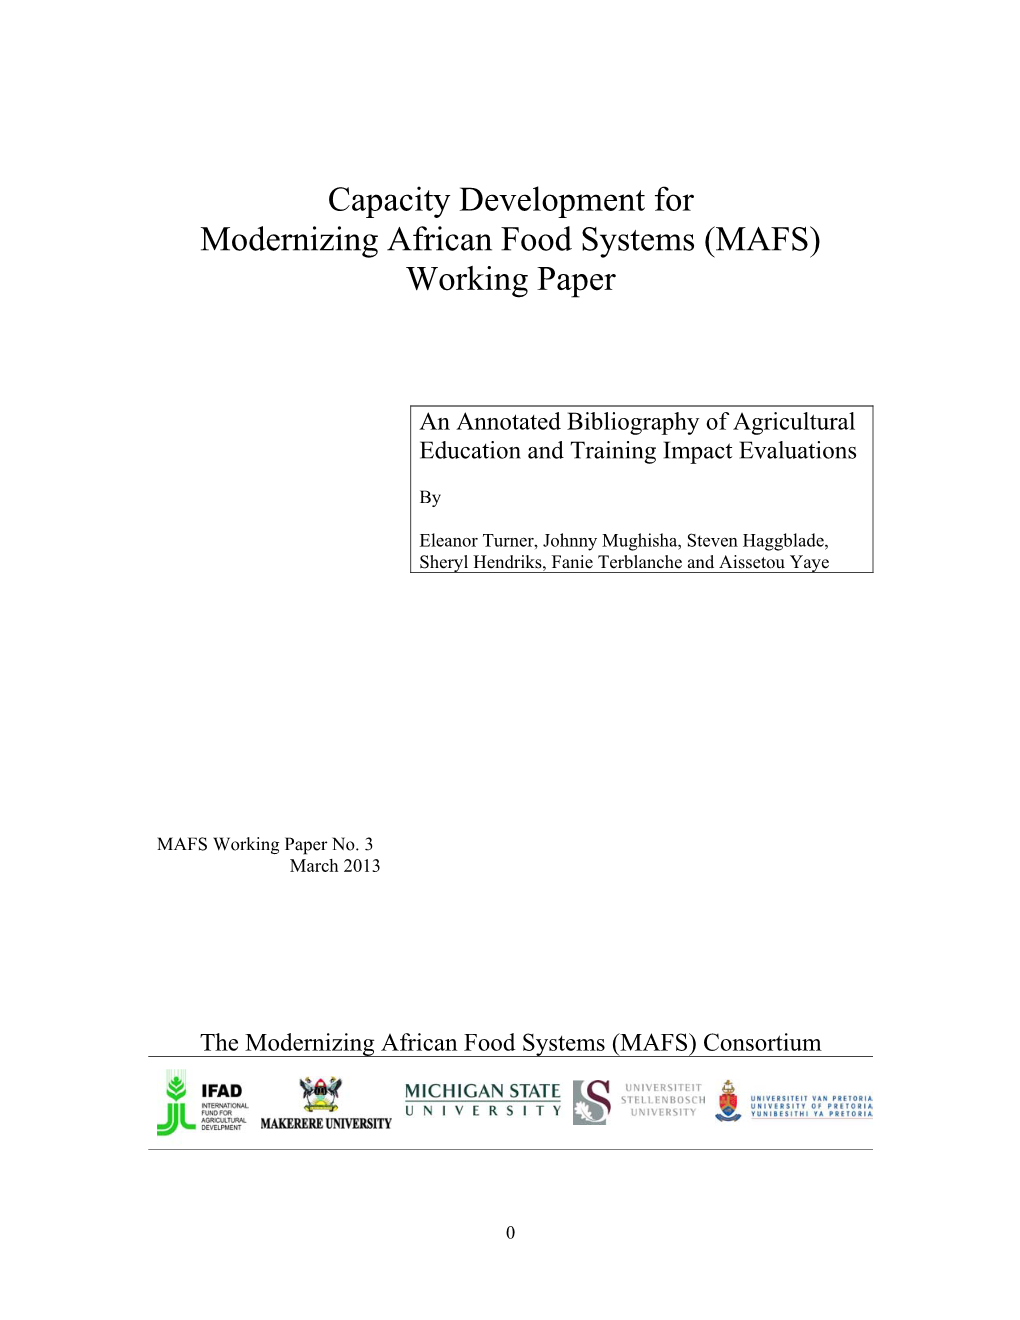 Capacity Development for Modernizing African Food Systems (MAFS) Working Paper